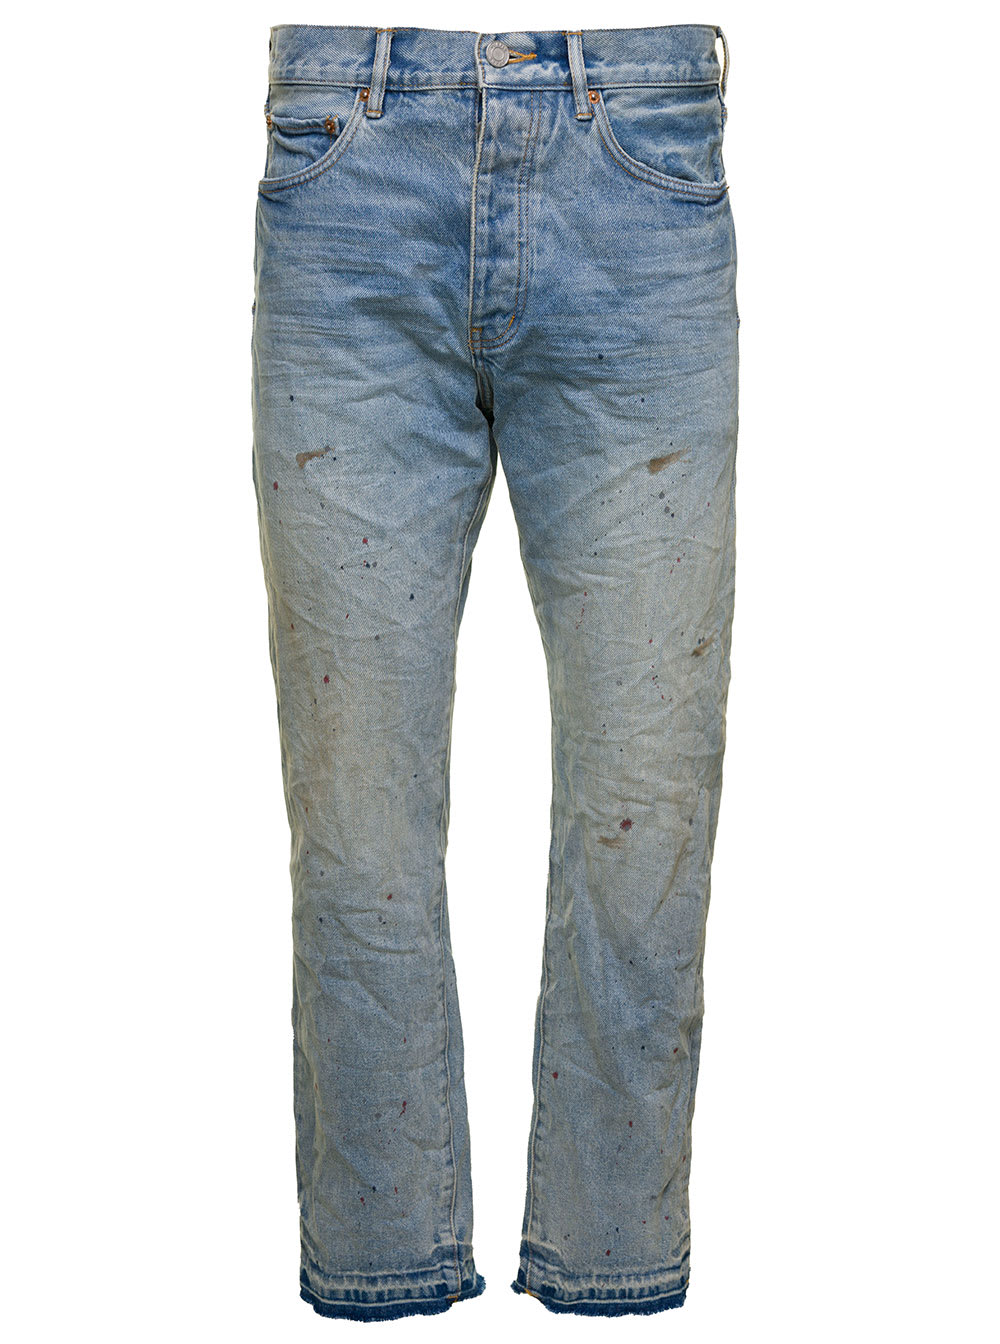 purple brand light blue straight jeans with used and crumpled effect in stretch cotton denim man